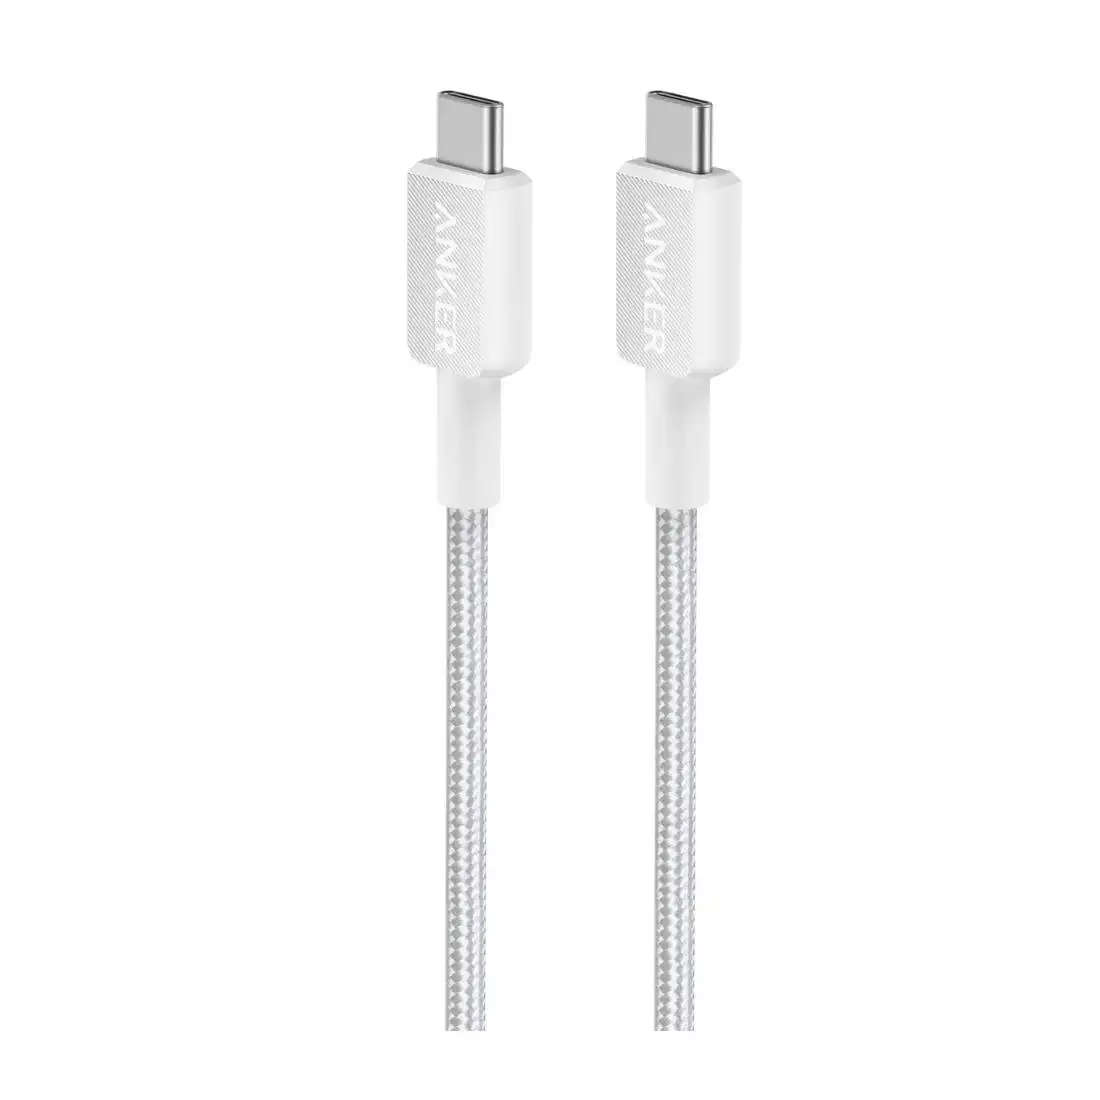 Anker 322 USB-C to USB-C Cable (0.9m Braided) - White